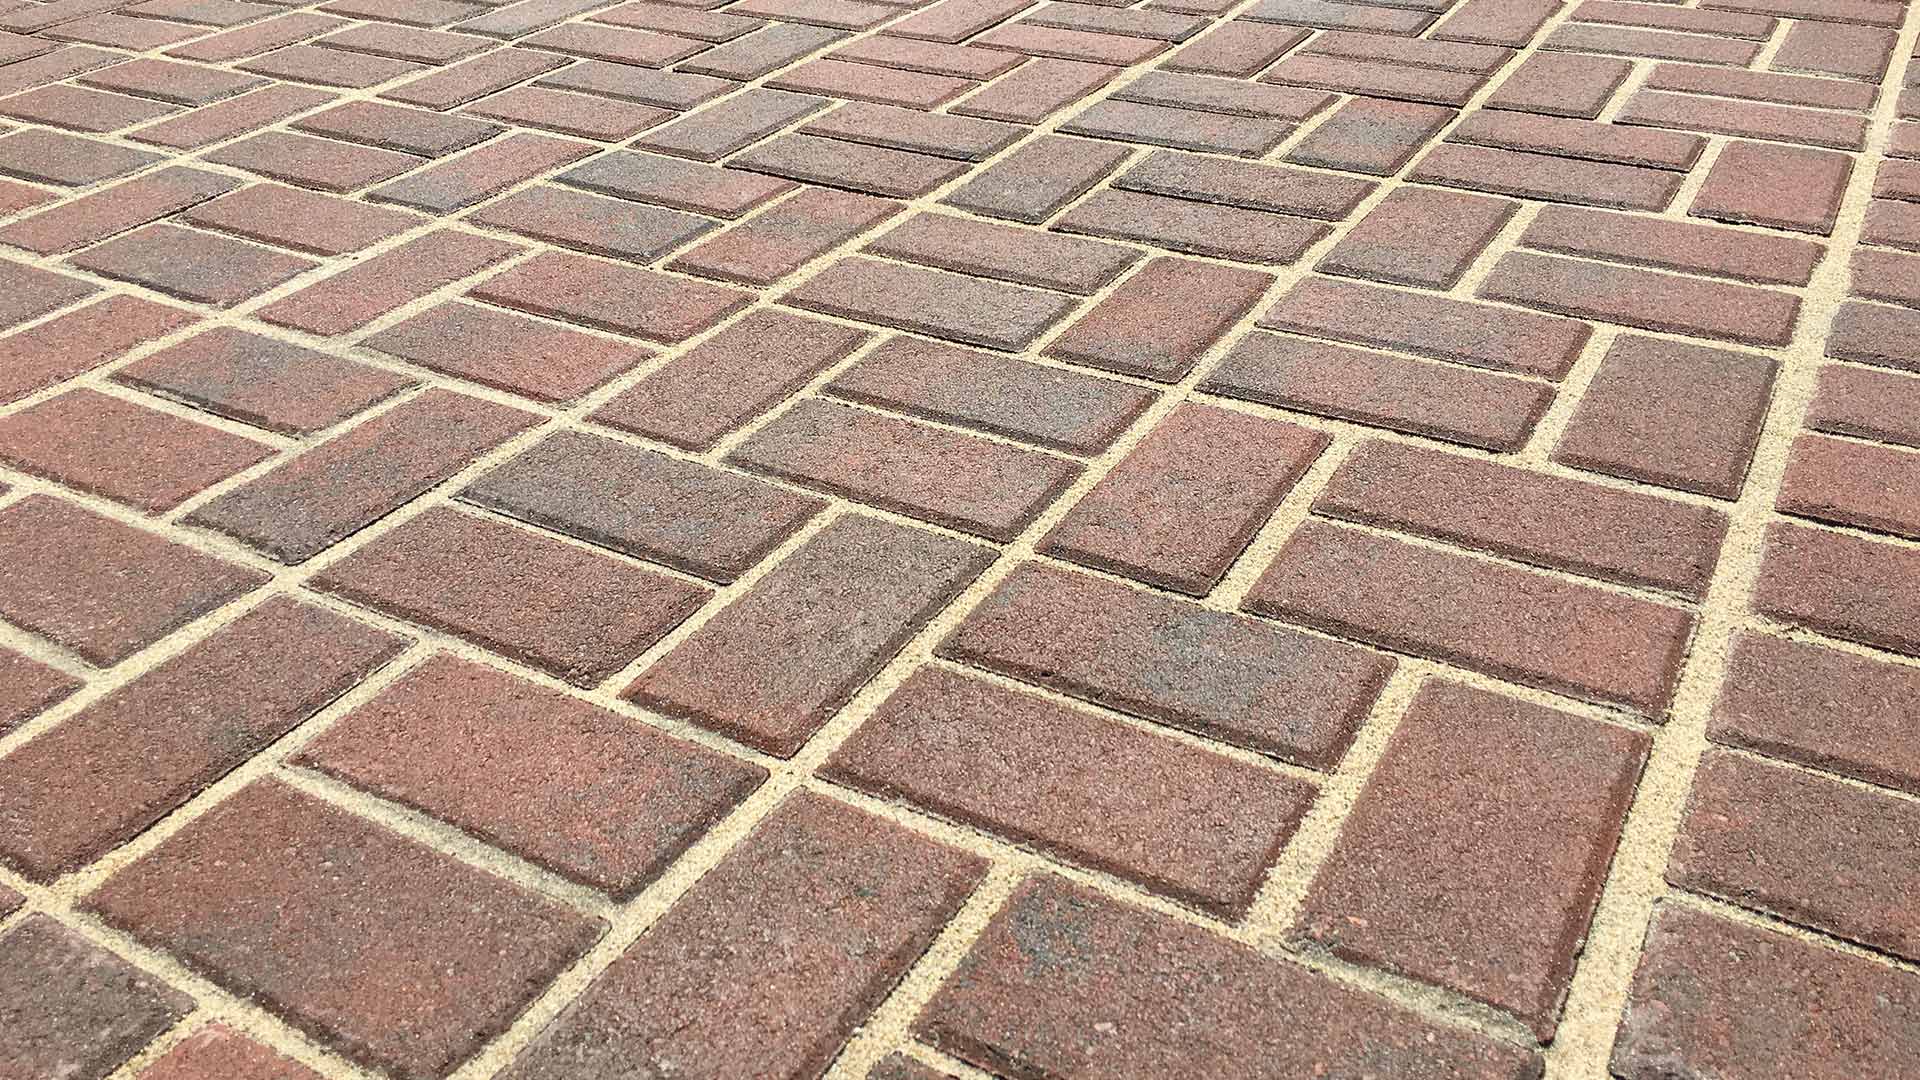 Red brick pavers up close at a home in Naples, FL.